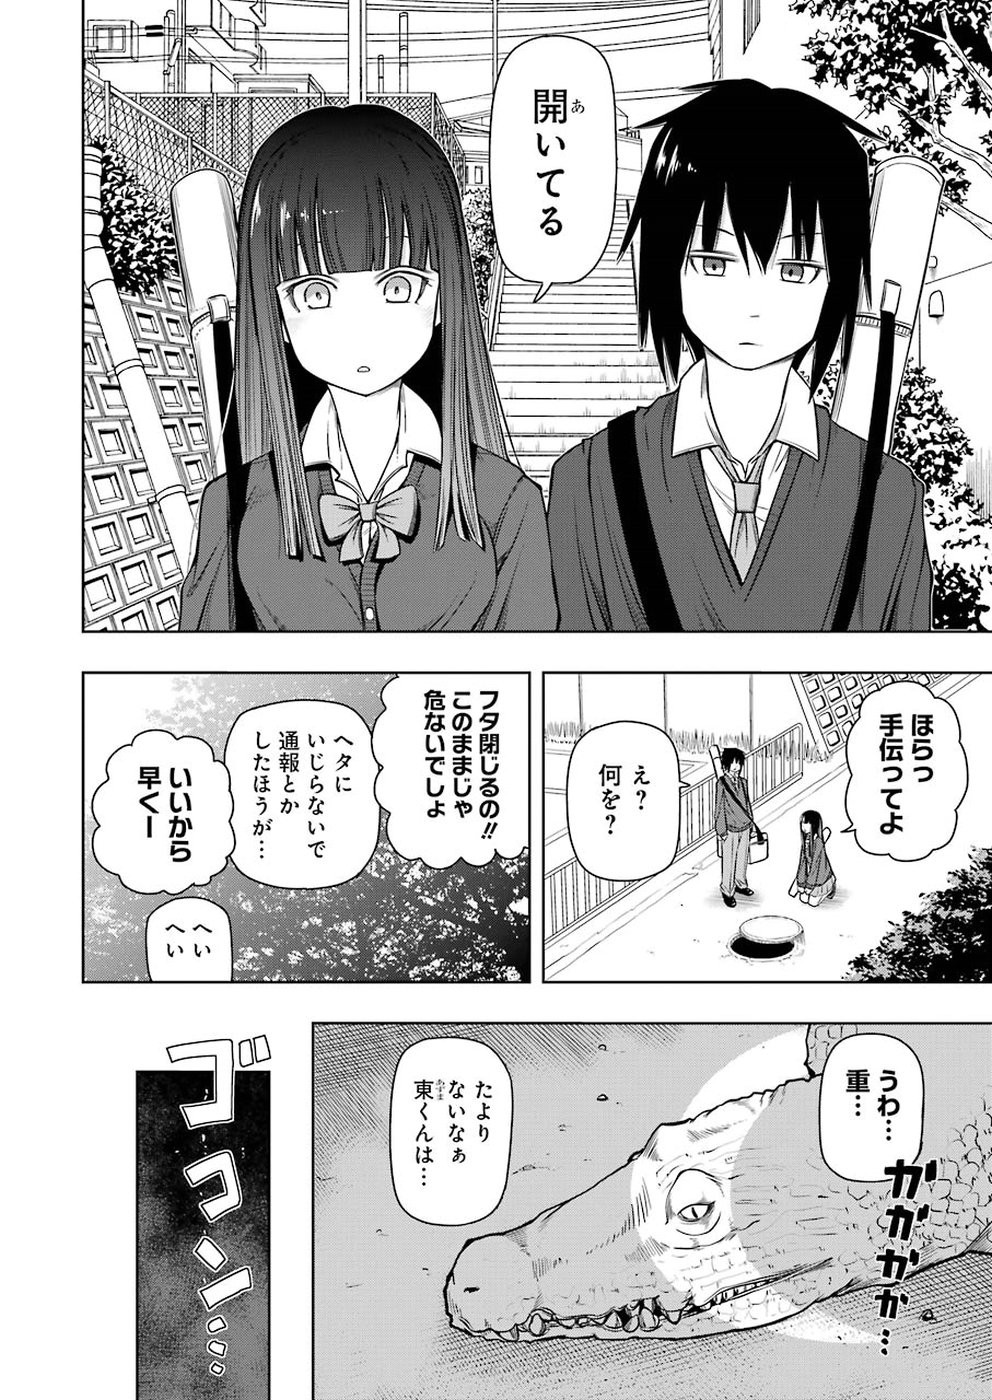 + Tic Nee-san - Chapter 184 - Page 2